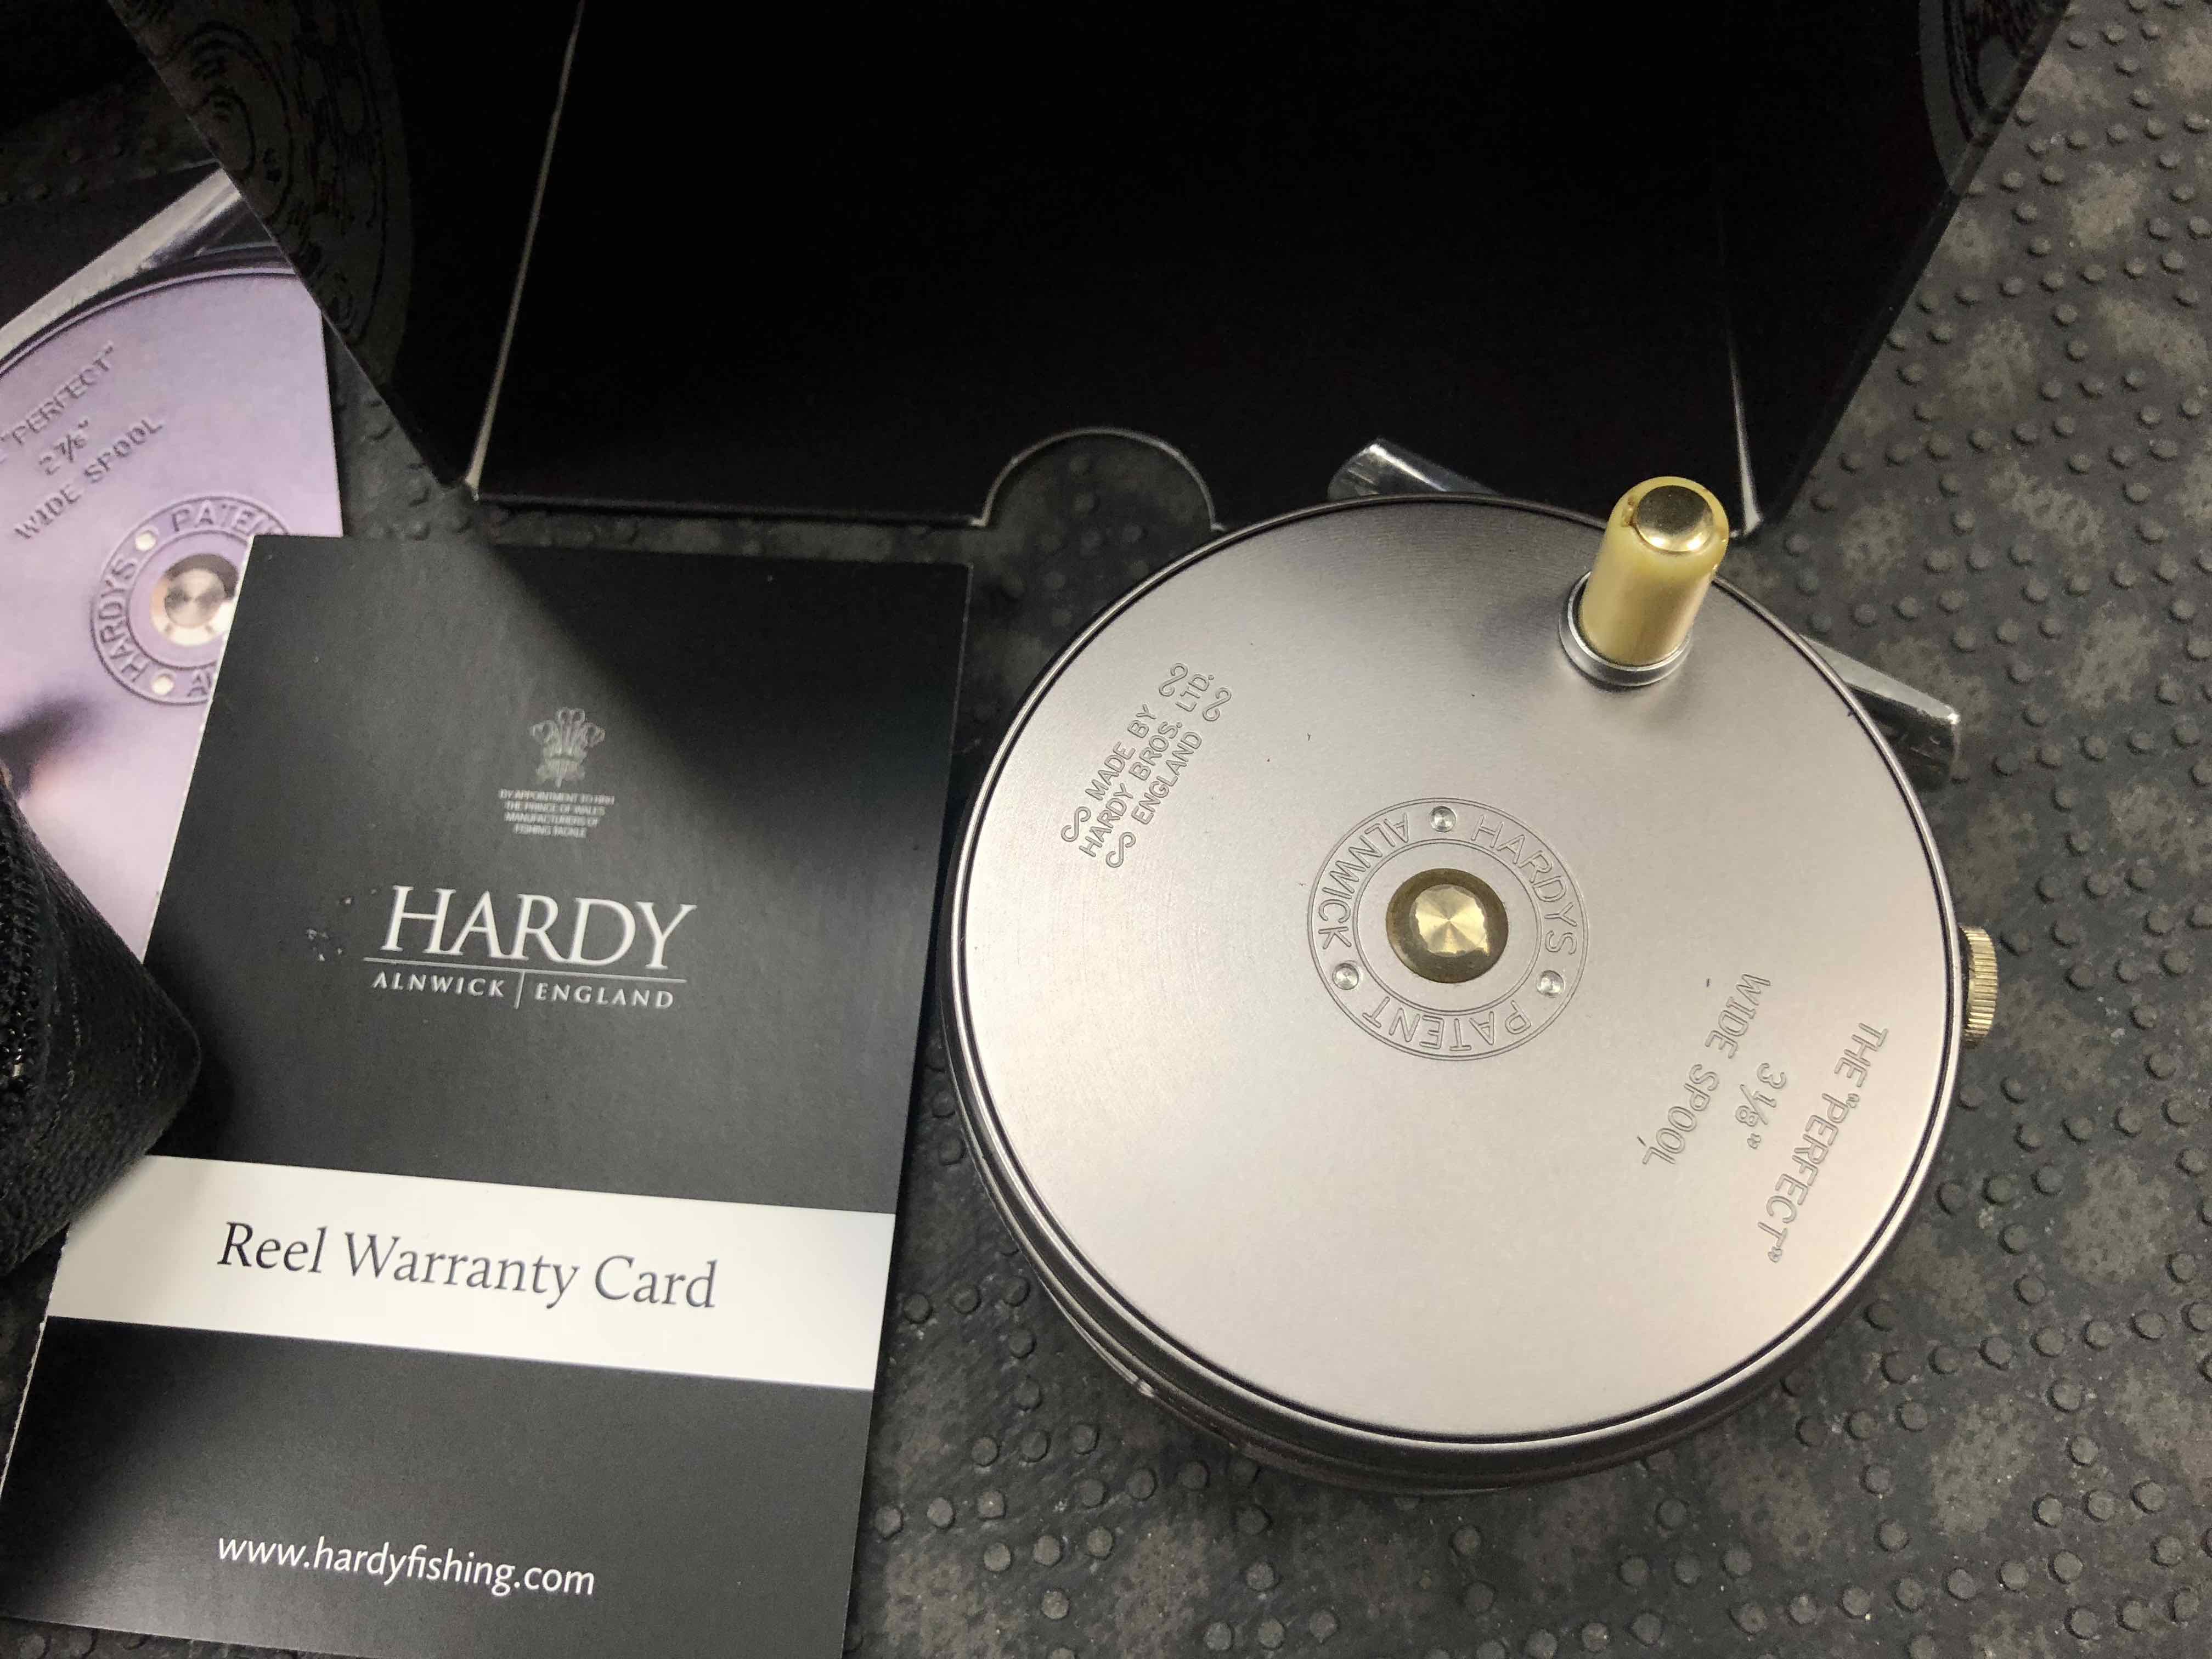 https://thefirstcast.ca/wp-content/uploads/2018/02/Hardy-The-Perfect-3-18-Made-in-England-Fly-Reel-Wide-Spool-AA.jpg